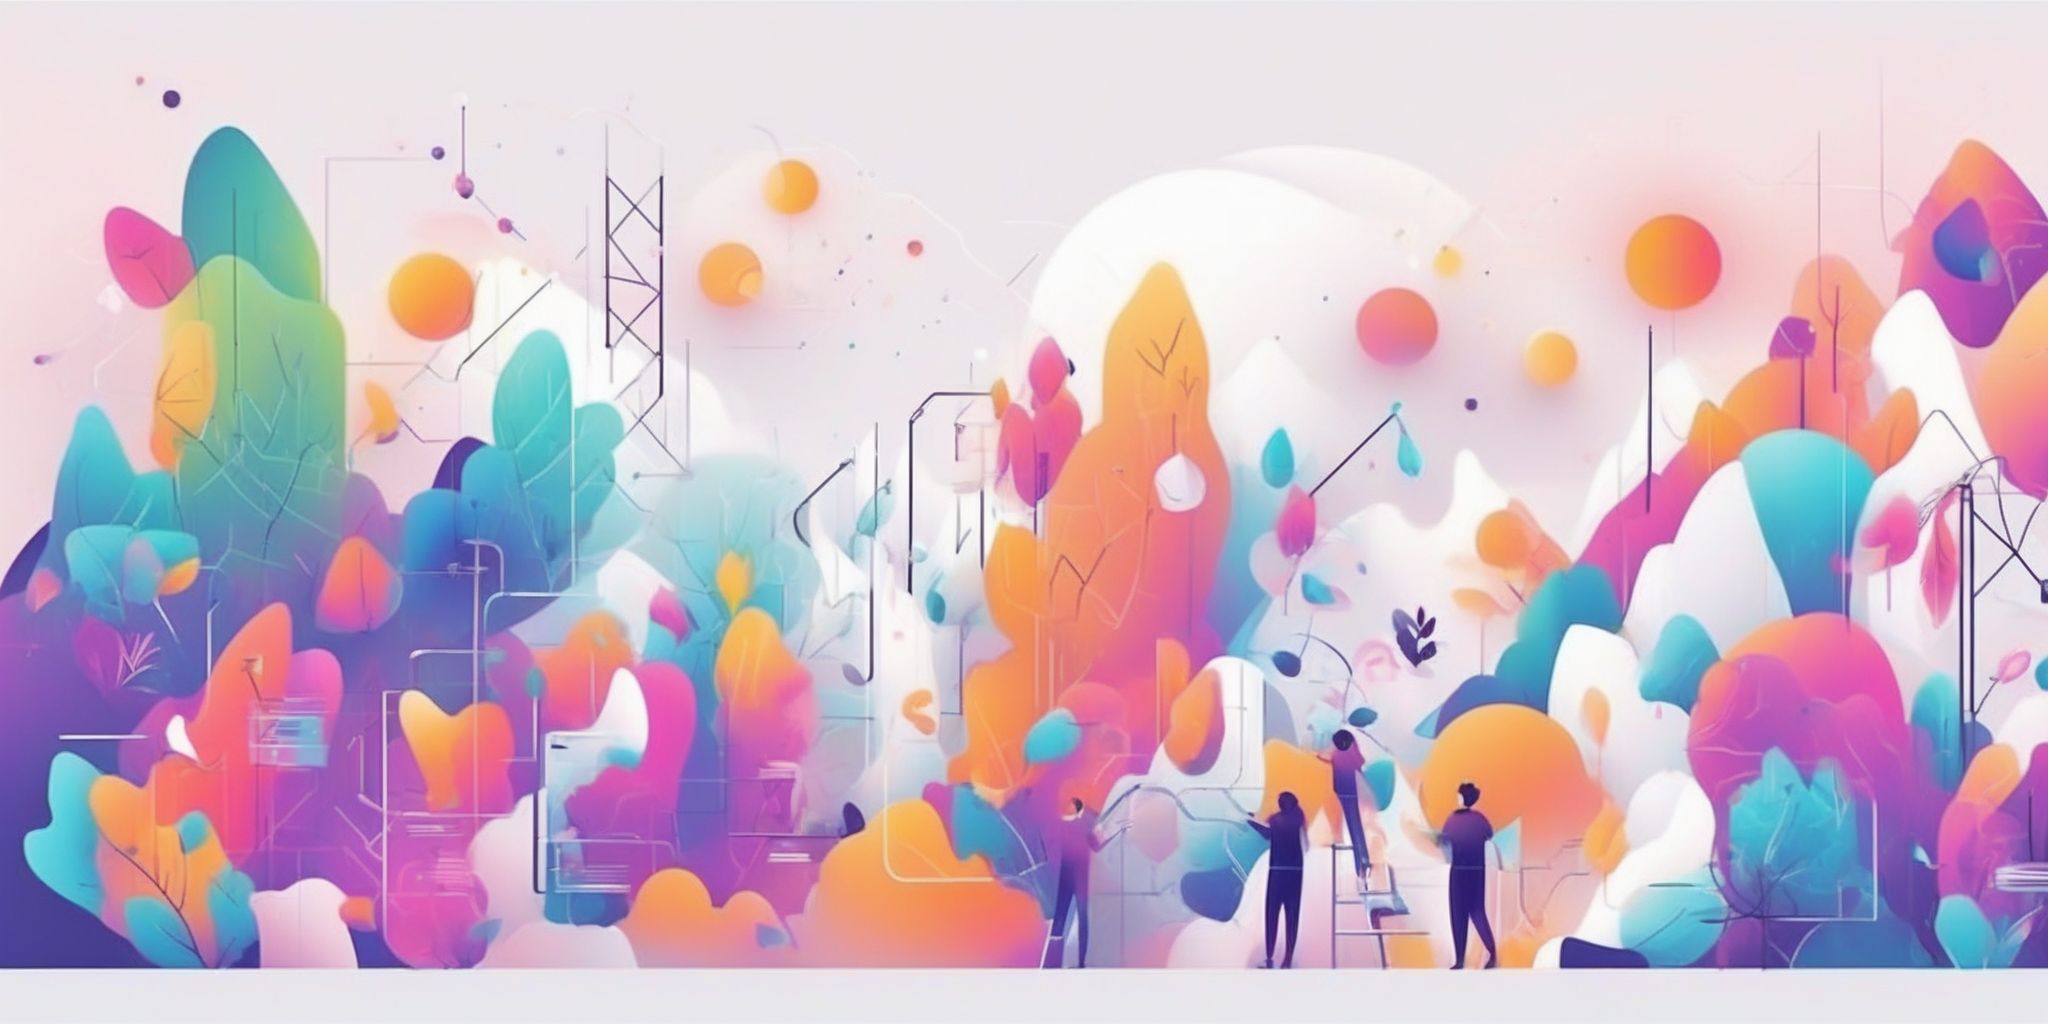 innovation in illustration style with gradients and white background